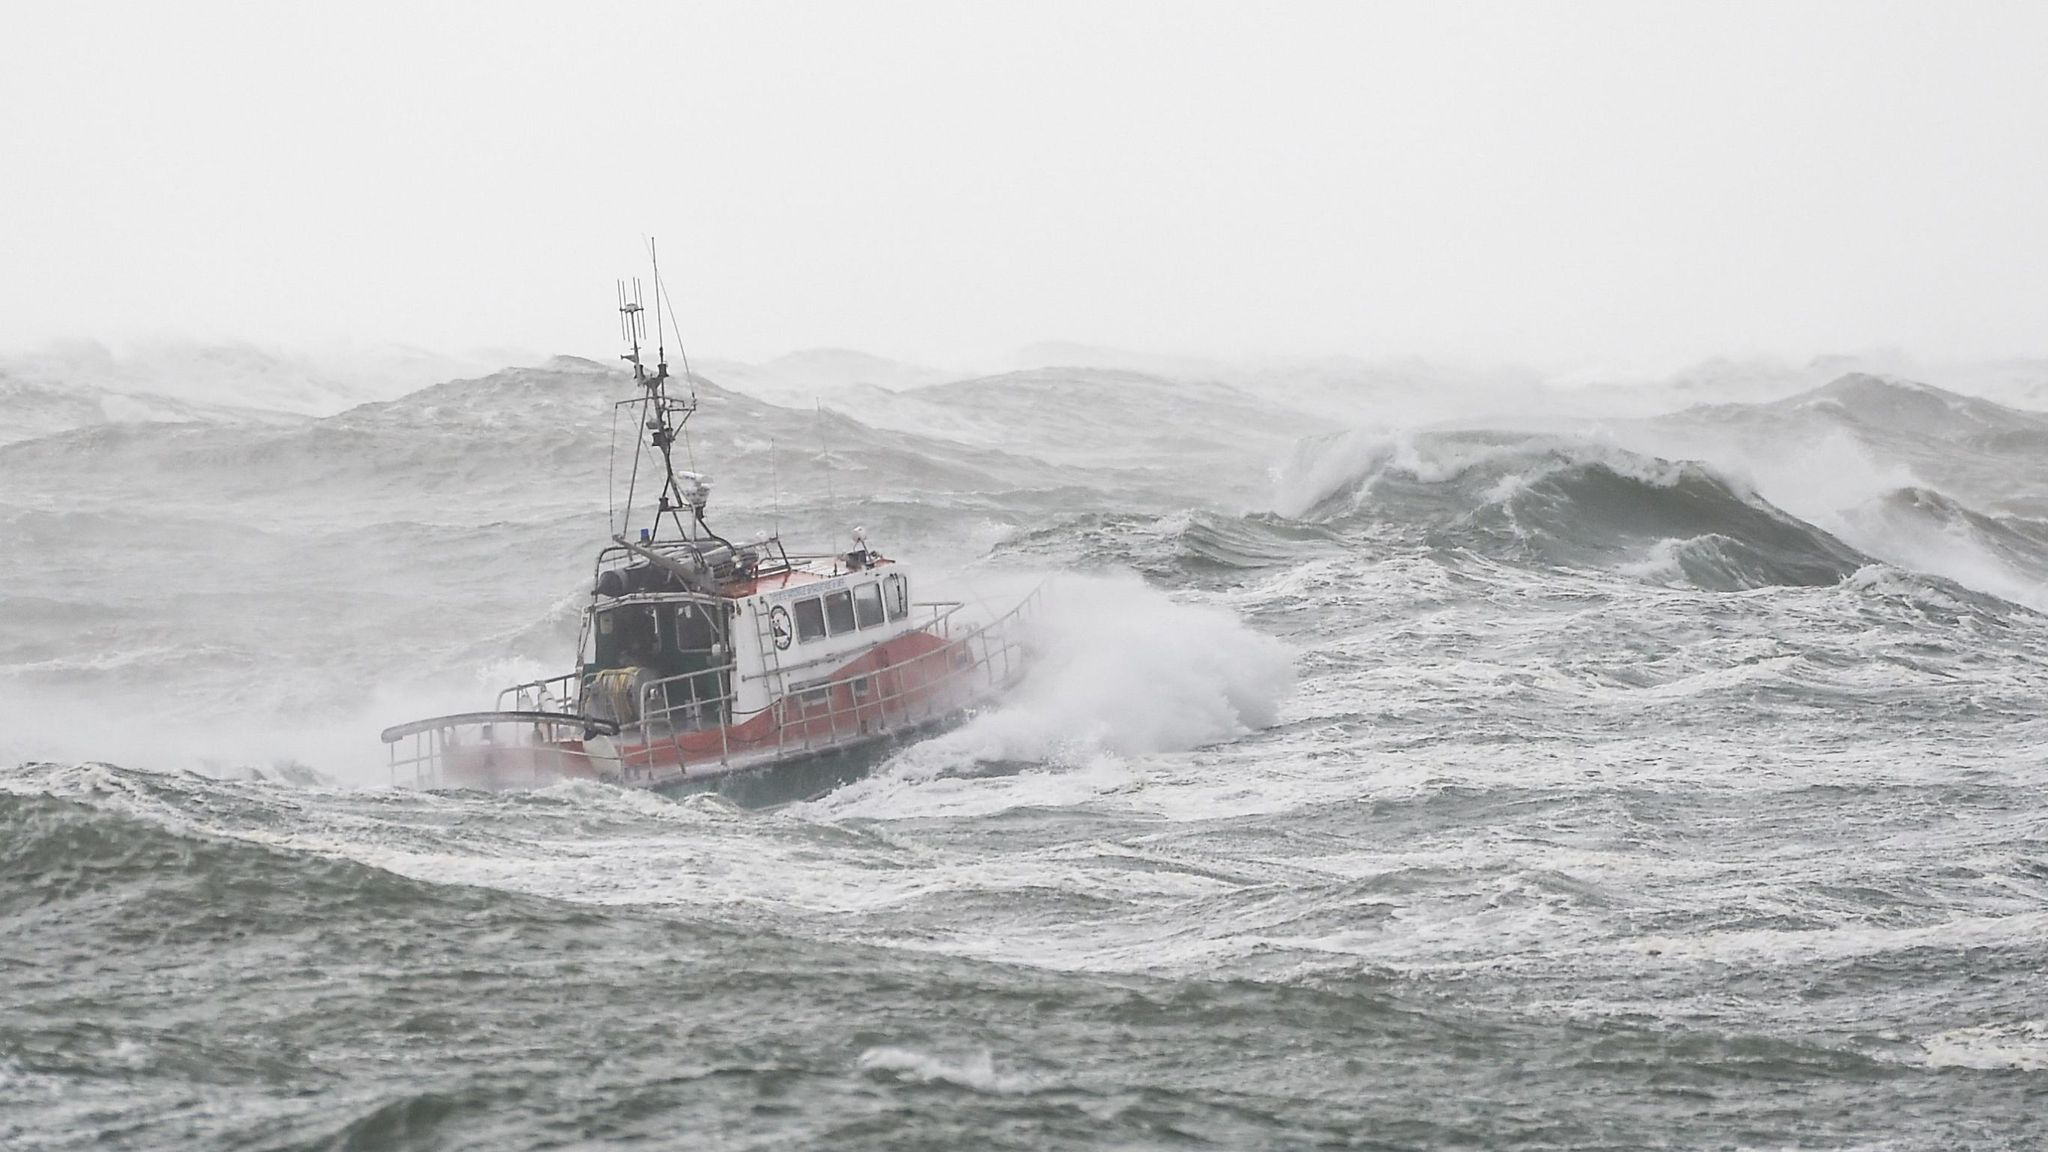 Three dead after rescue boat overturns as Storm Miguel